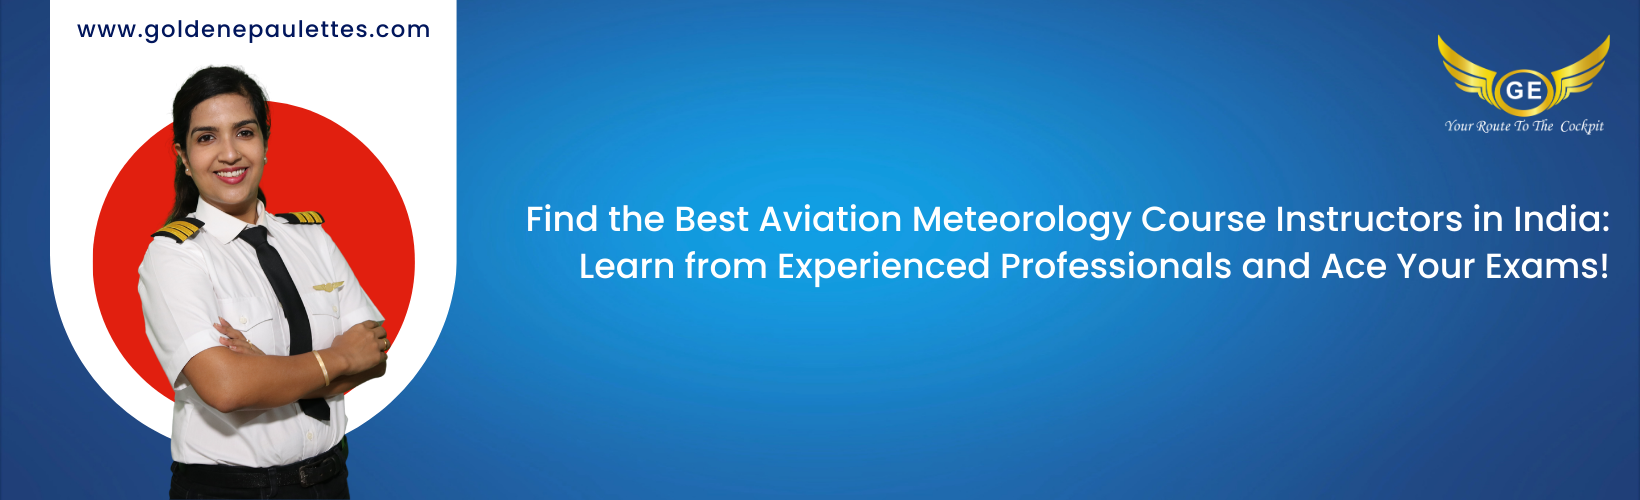 Aviation Meteorology Course Resources in India